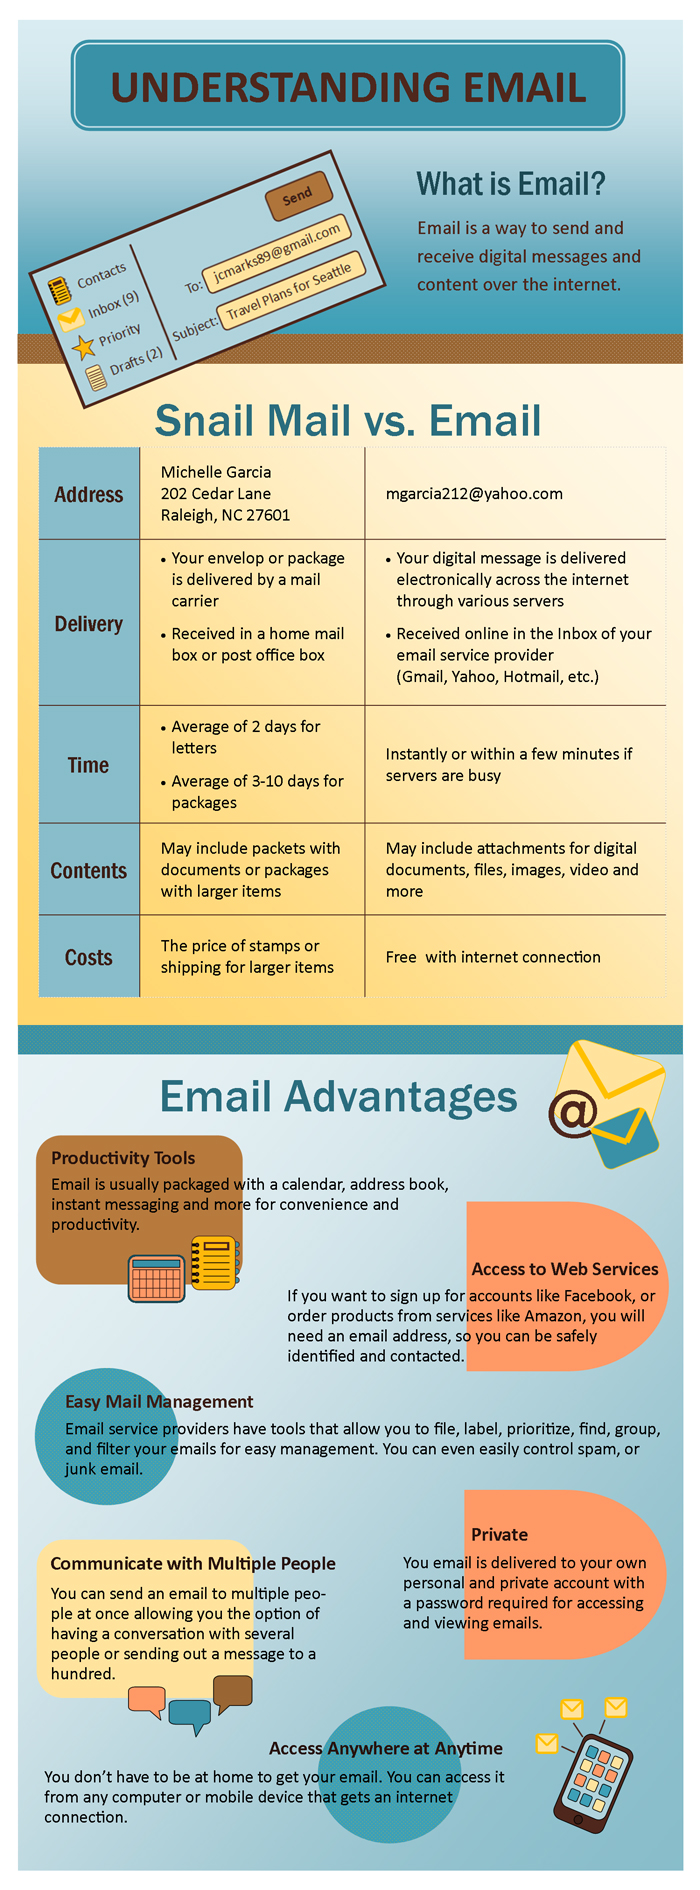 Understanding Email Infographic: What is Email? Email is a way to send and receive digital messages and content over the internet. Snail Mail VS Email: Snail Mail Address: Michelle Garcia 202 Cedar Lane Raleigh NC 27601. Email Address: mgarcia212@yahoo.com. Snail Mail Delivery: Your envelop or package is delivered by a mail carrier and received in a home mail box or post office box. Email Delivery: Your digital message is delivered electronically across the internet through various servers and received online in the inbox of your email service provider(Gmail, Yahoo, Hotmail, etc.). Snail Mail Time: Average of 2 days for Letters, 3-10 days for packages. Email Delivery: Instanlty or within a few minutes if servers are busy. Snail Mail Contents: May include packets with documents or packages with larger items. Email Contents: May include attachments for digital  documents, files, images, video and more. Snail Mail Cost:The price of stamps or shipping for larger items. Email Cost: Free with internet connection. Email Advantages: Productivity Tools: Email is usually packaged with a calendar, address book, instant messaging and more for convenience and productivity. Access to Web Services: If you want to sign up for accounts like Facebook, or order products from services like Amazon, you will need an email address, so you can be safely       identified and contacted. Easy Mail Management: Email service providers have tools that allow you to file, label, prioritize, find, group, and filter your emails for easy management. You can even easily control spam, or junk email. Communicate with Multiple People: You can send an email to multiple  people at once allowing you the option of having a conversation with several people or sending out a message to a hundred. Private: You email is delivered to your own personal and private account with a password required for accessing and viewing emails. Access anywhere at anytime: You don’t have to be at home to get your email. You can access it from any computer or mobile device that gets an internet connection.